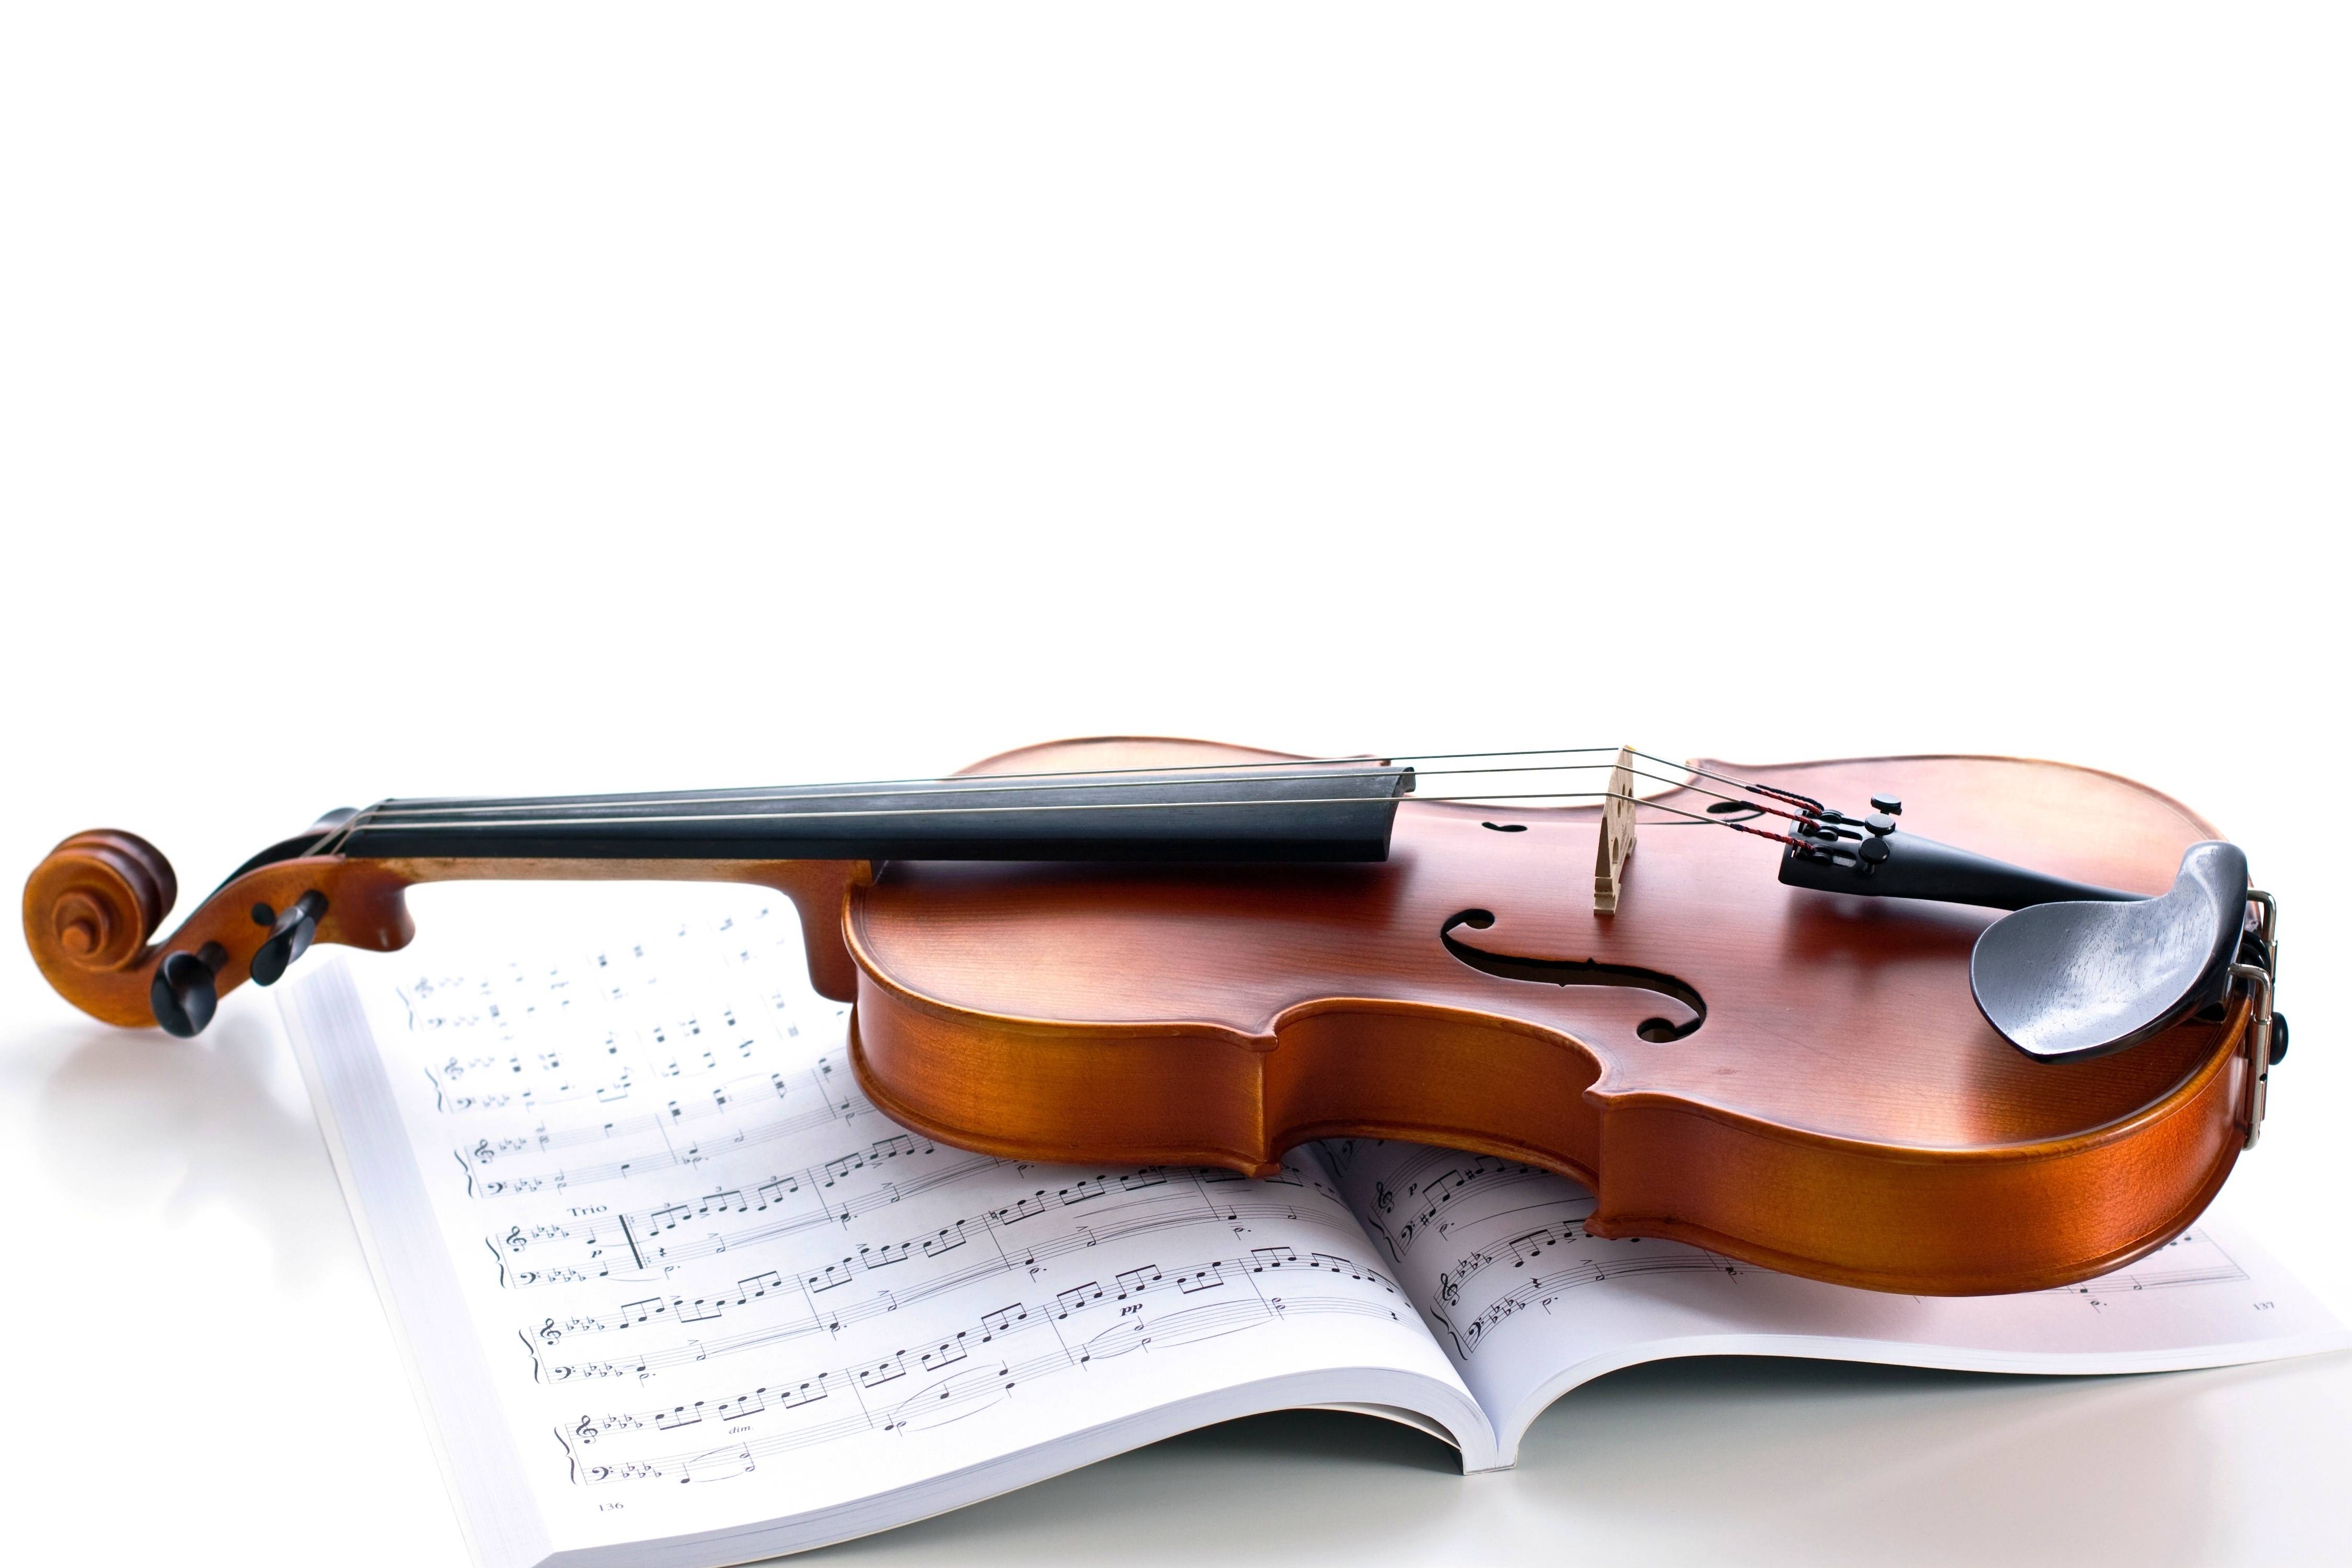 Wallpaper fiddle, violin, bow, bow, stringed musical instrument